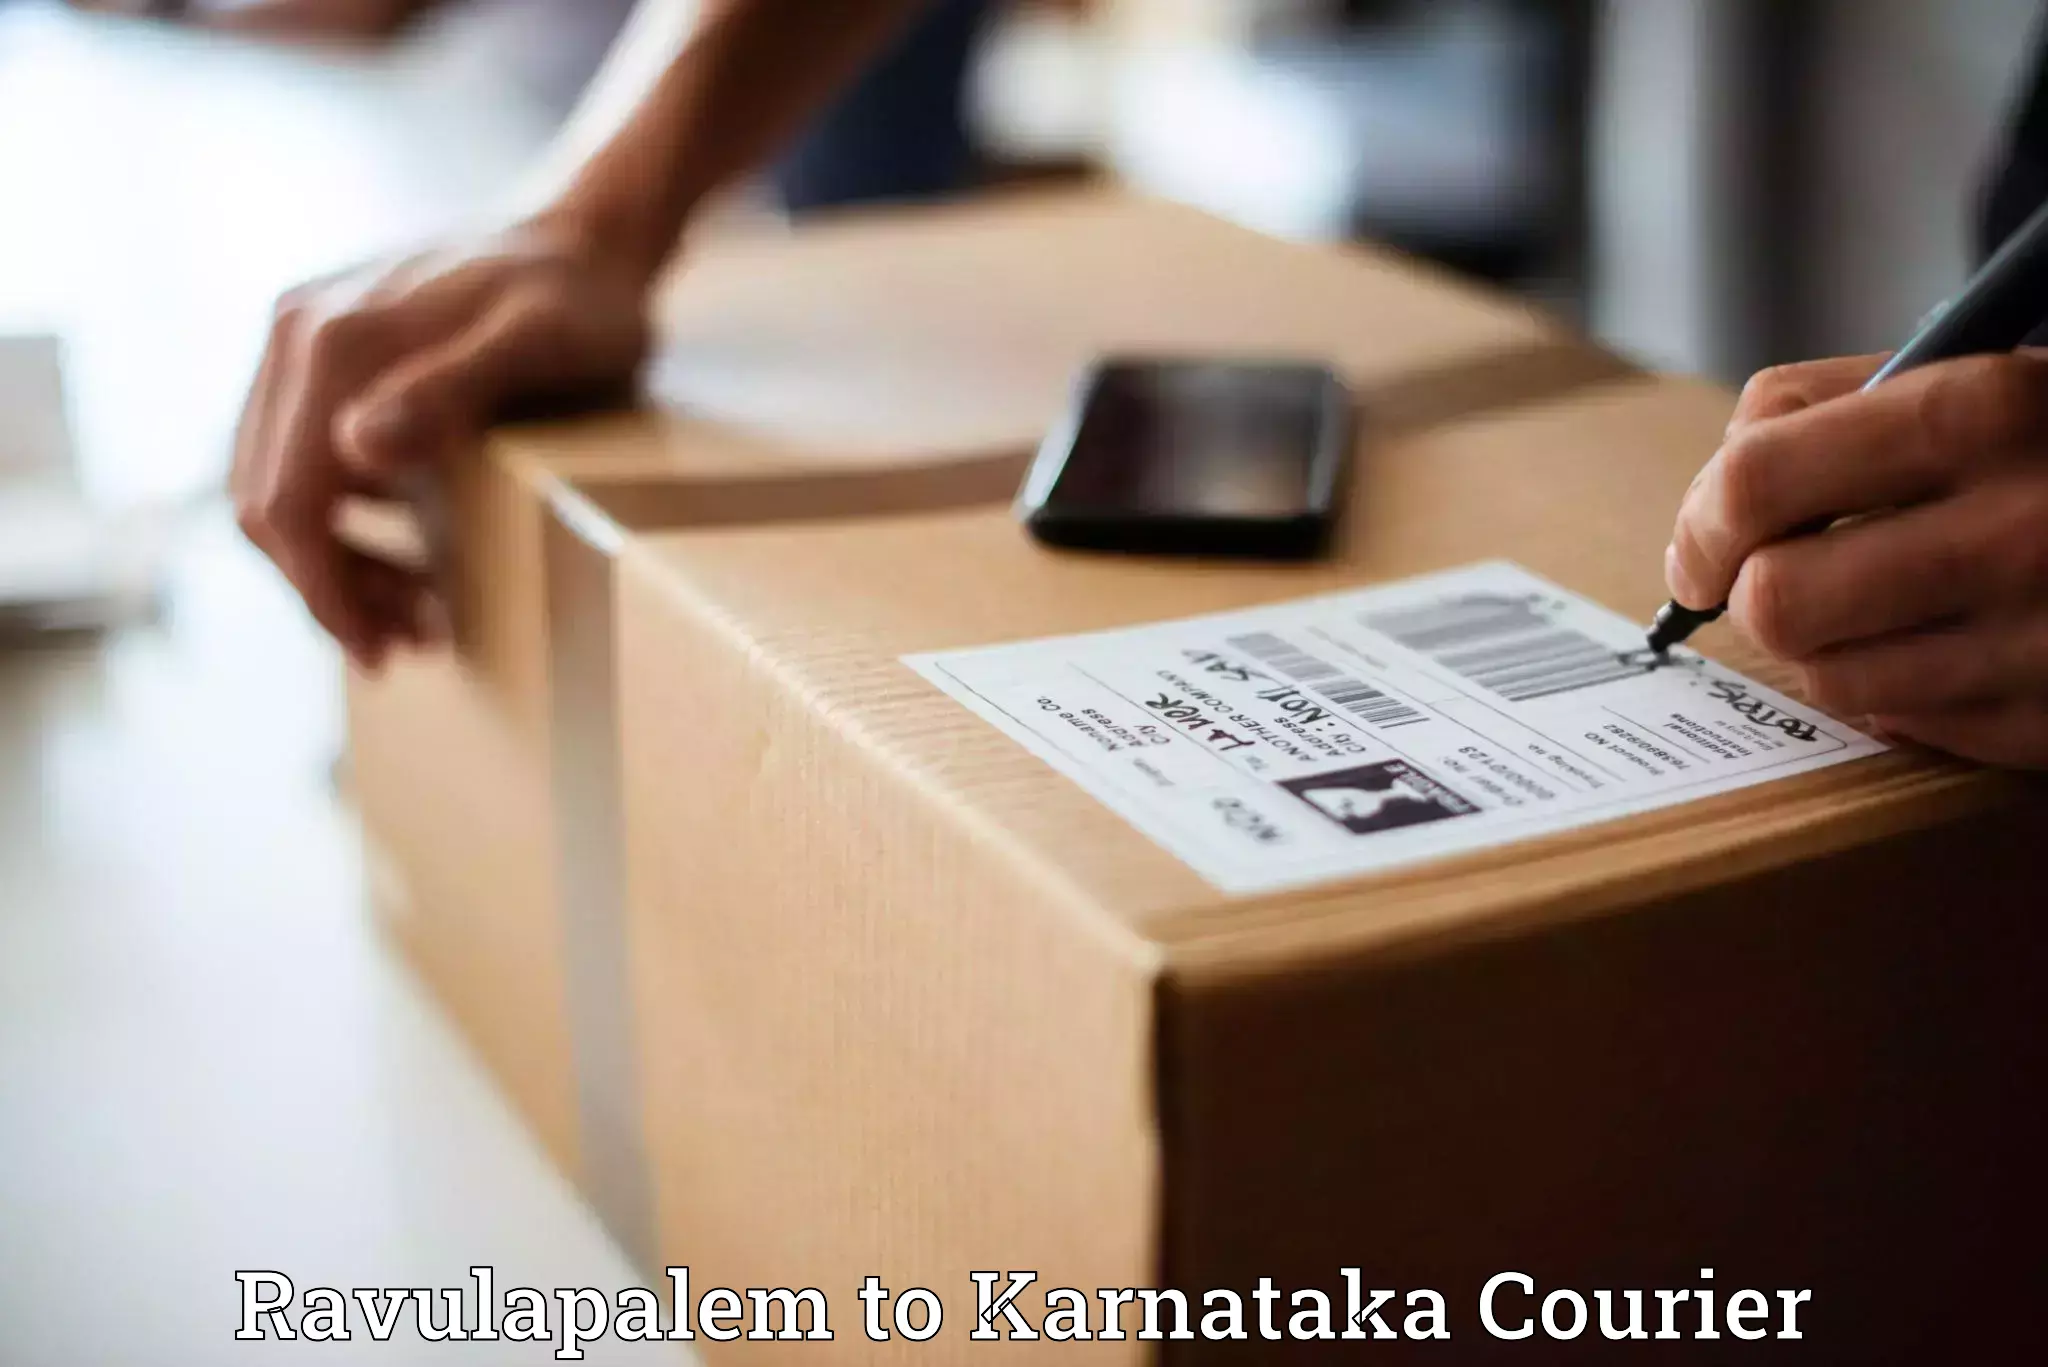 Courier app Ravulapalem to Byndoor